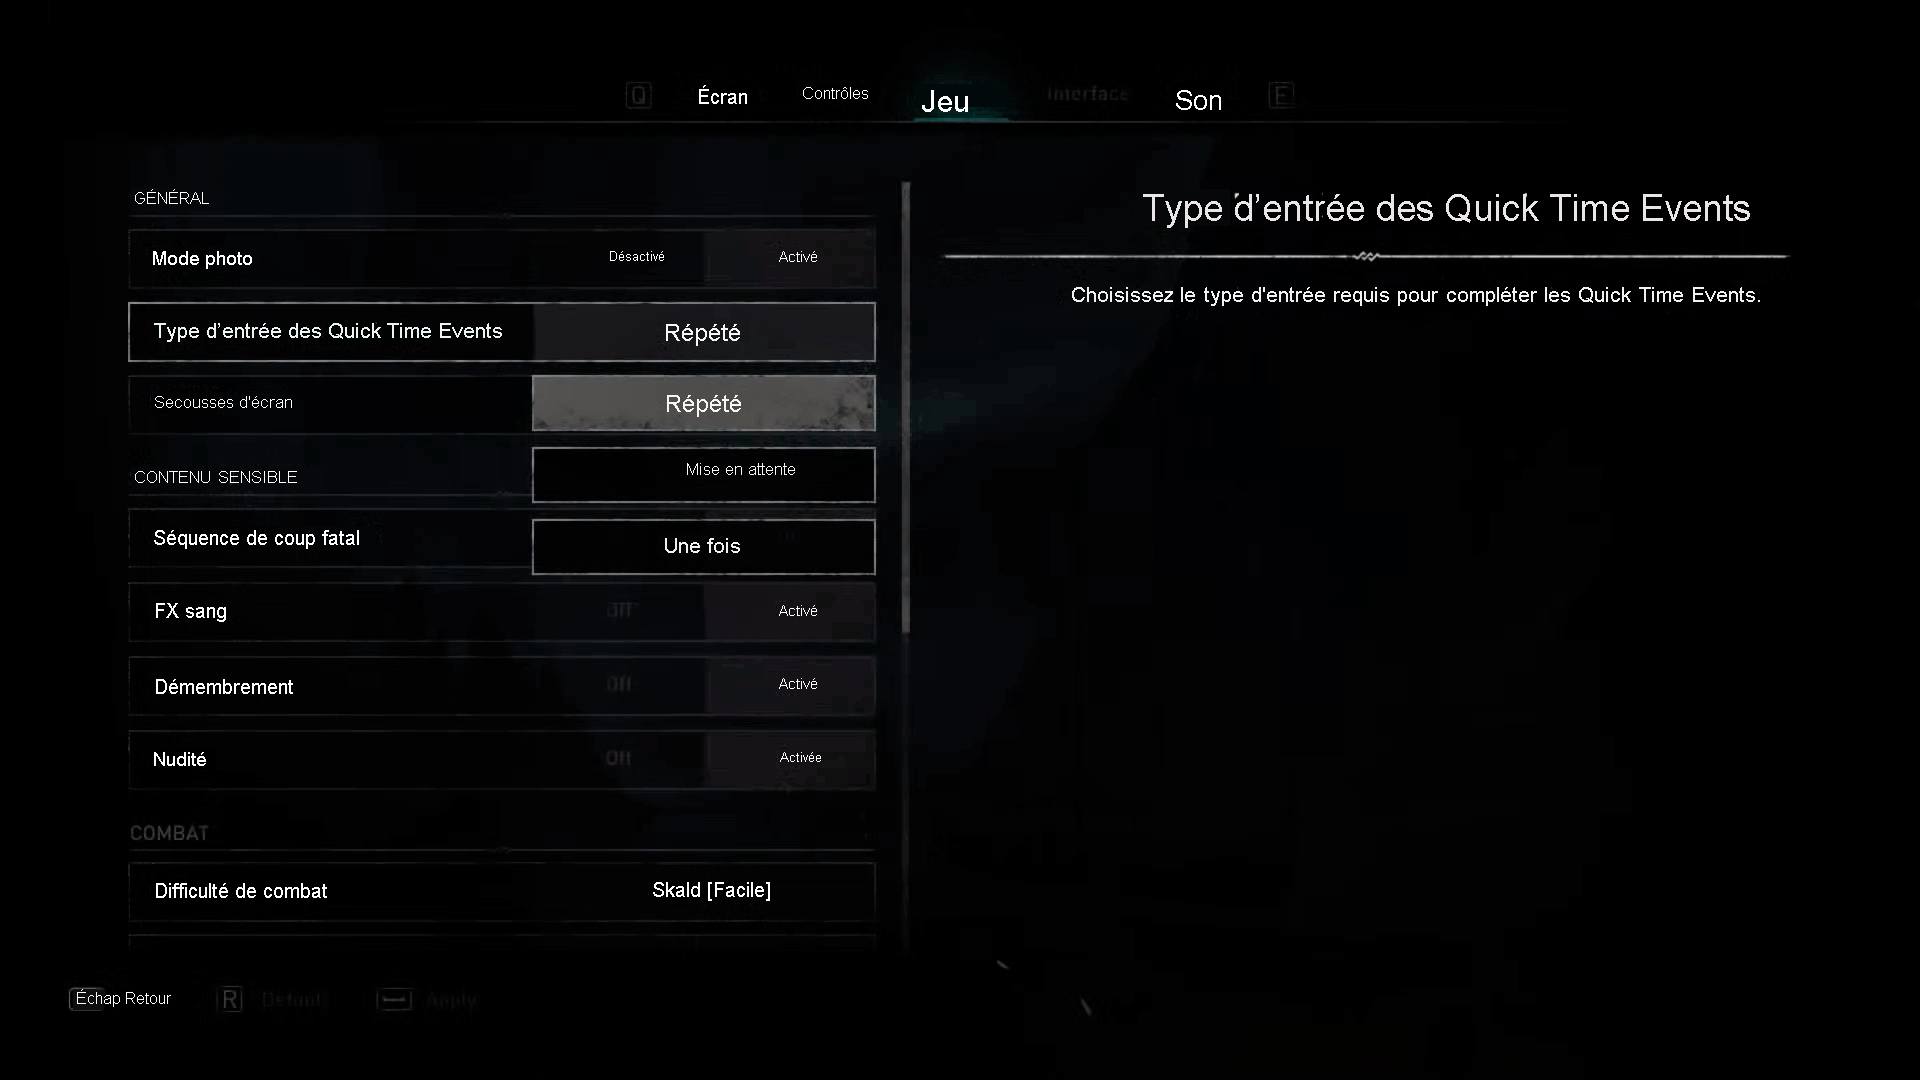 Screenshot that shows the Assassin's Creed Valhalla Quick Time Events Input Type settings. The options provided are Repeated, Hold, and One-Time.